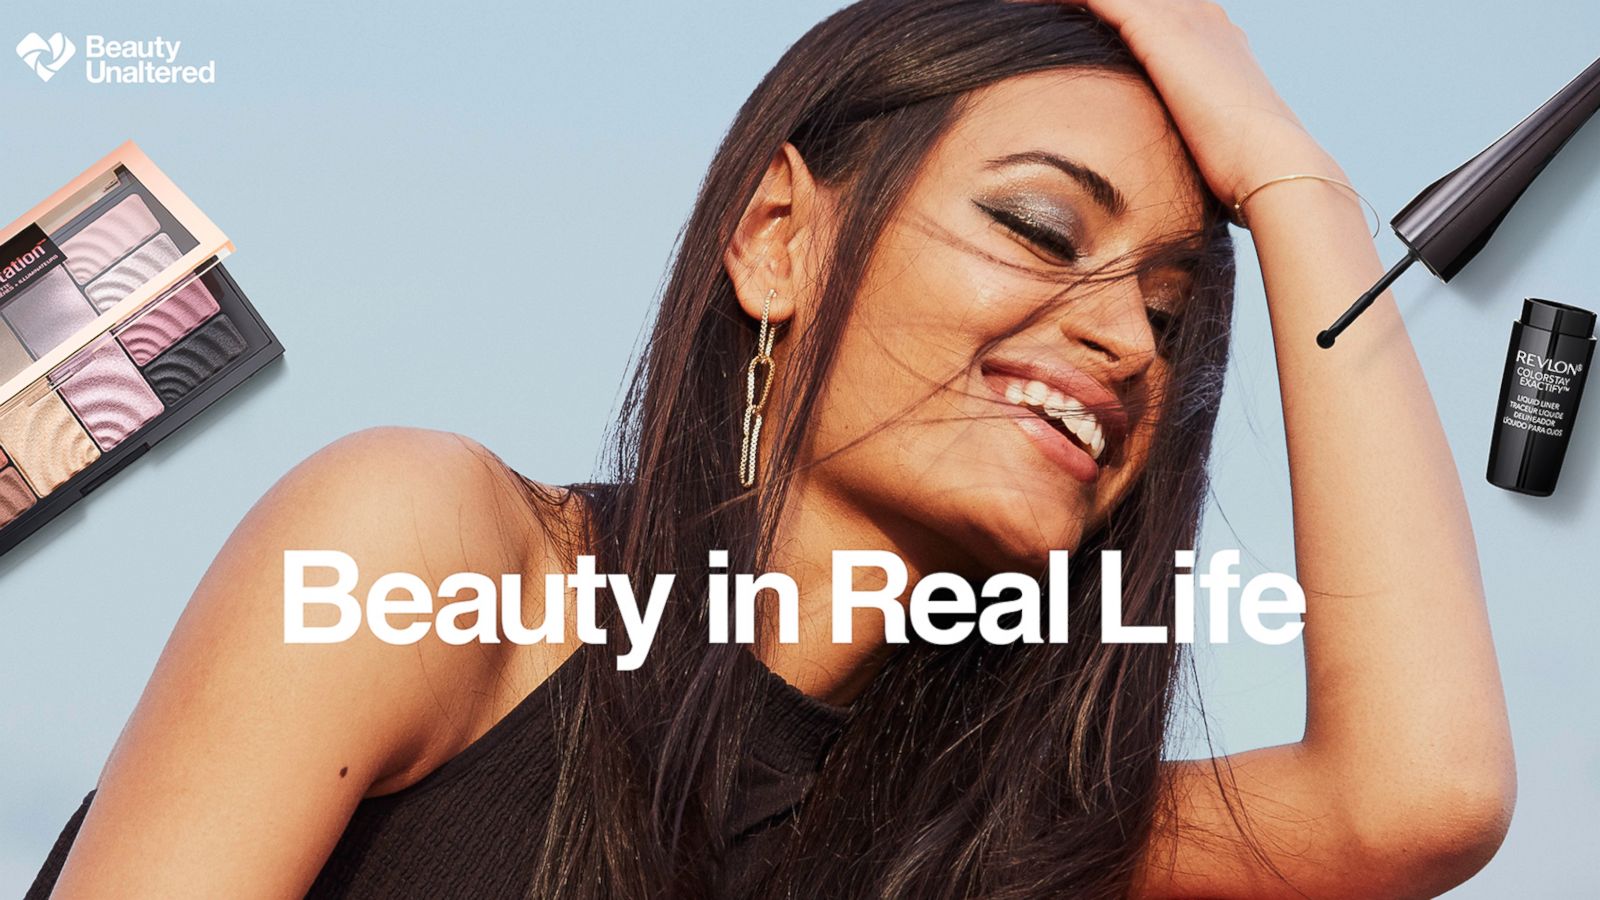 PHOTO: CVS Pharmacy launches its "Beauty in Real Life" campaign, April 19, 2018.